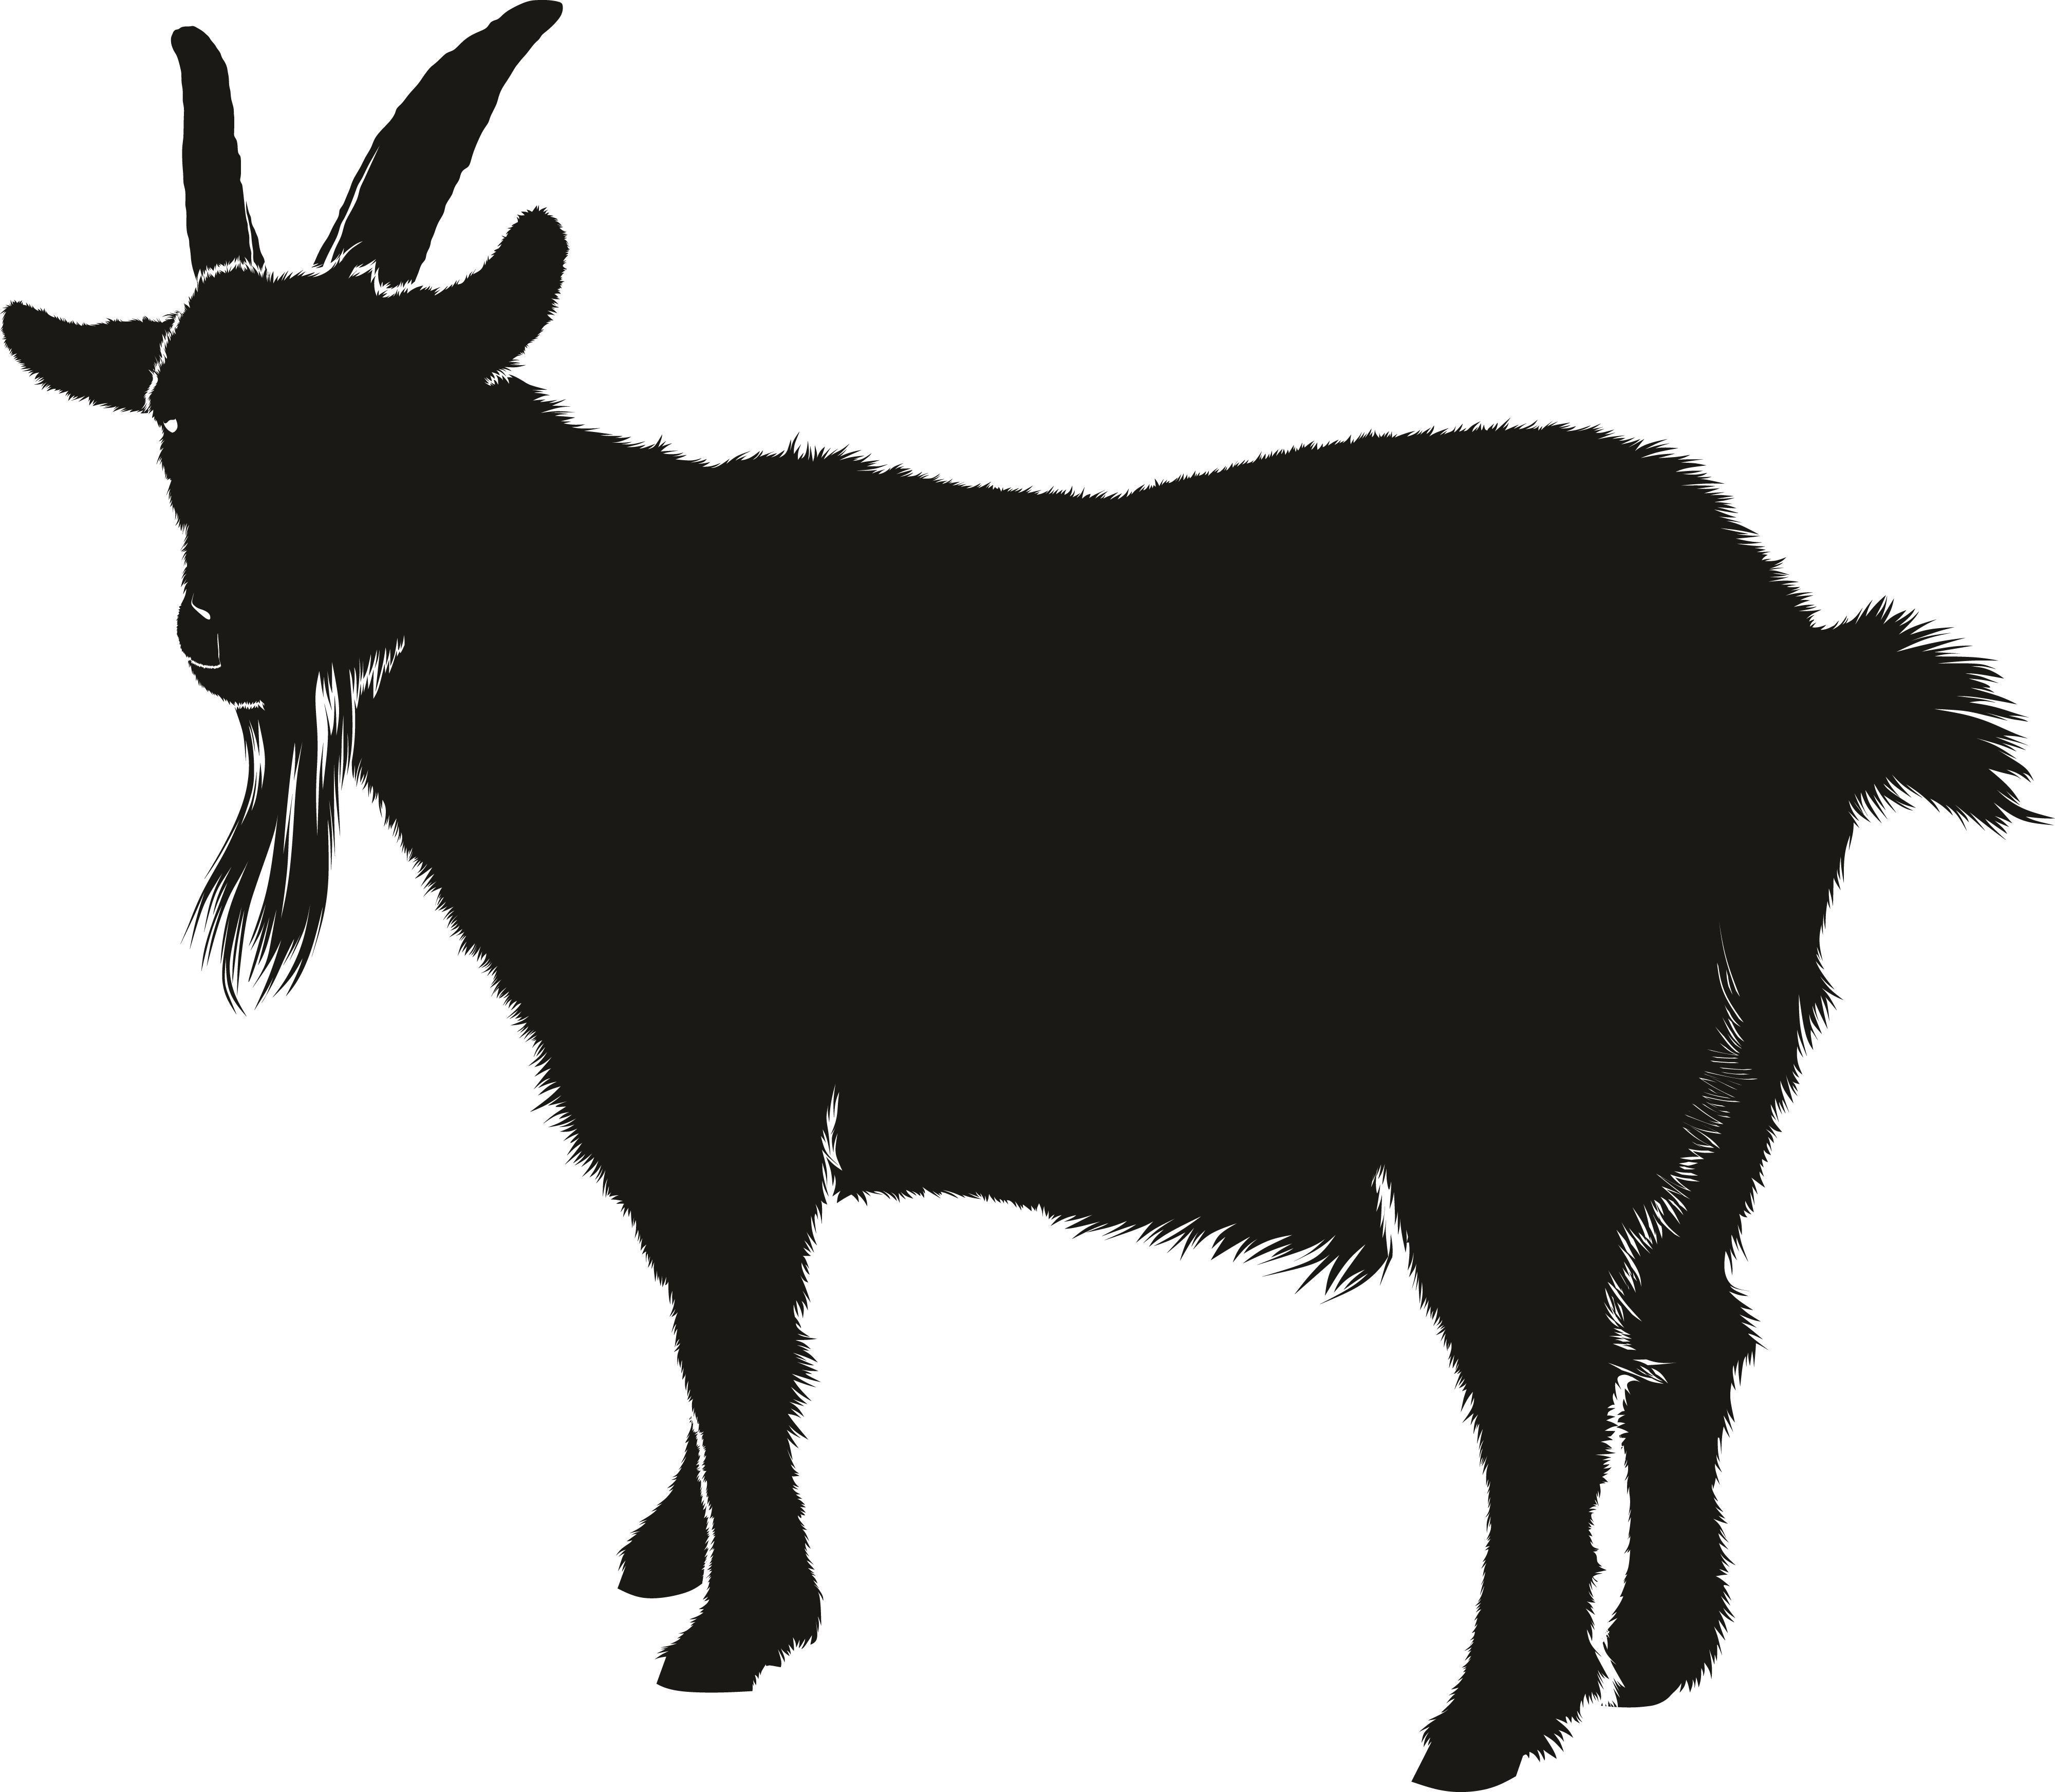 Boer Goat Silhouette Clip Art Png Download 40003489 Free.